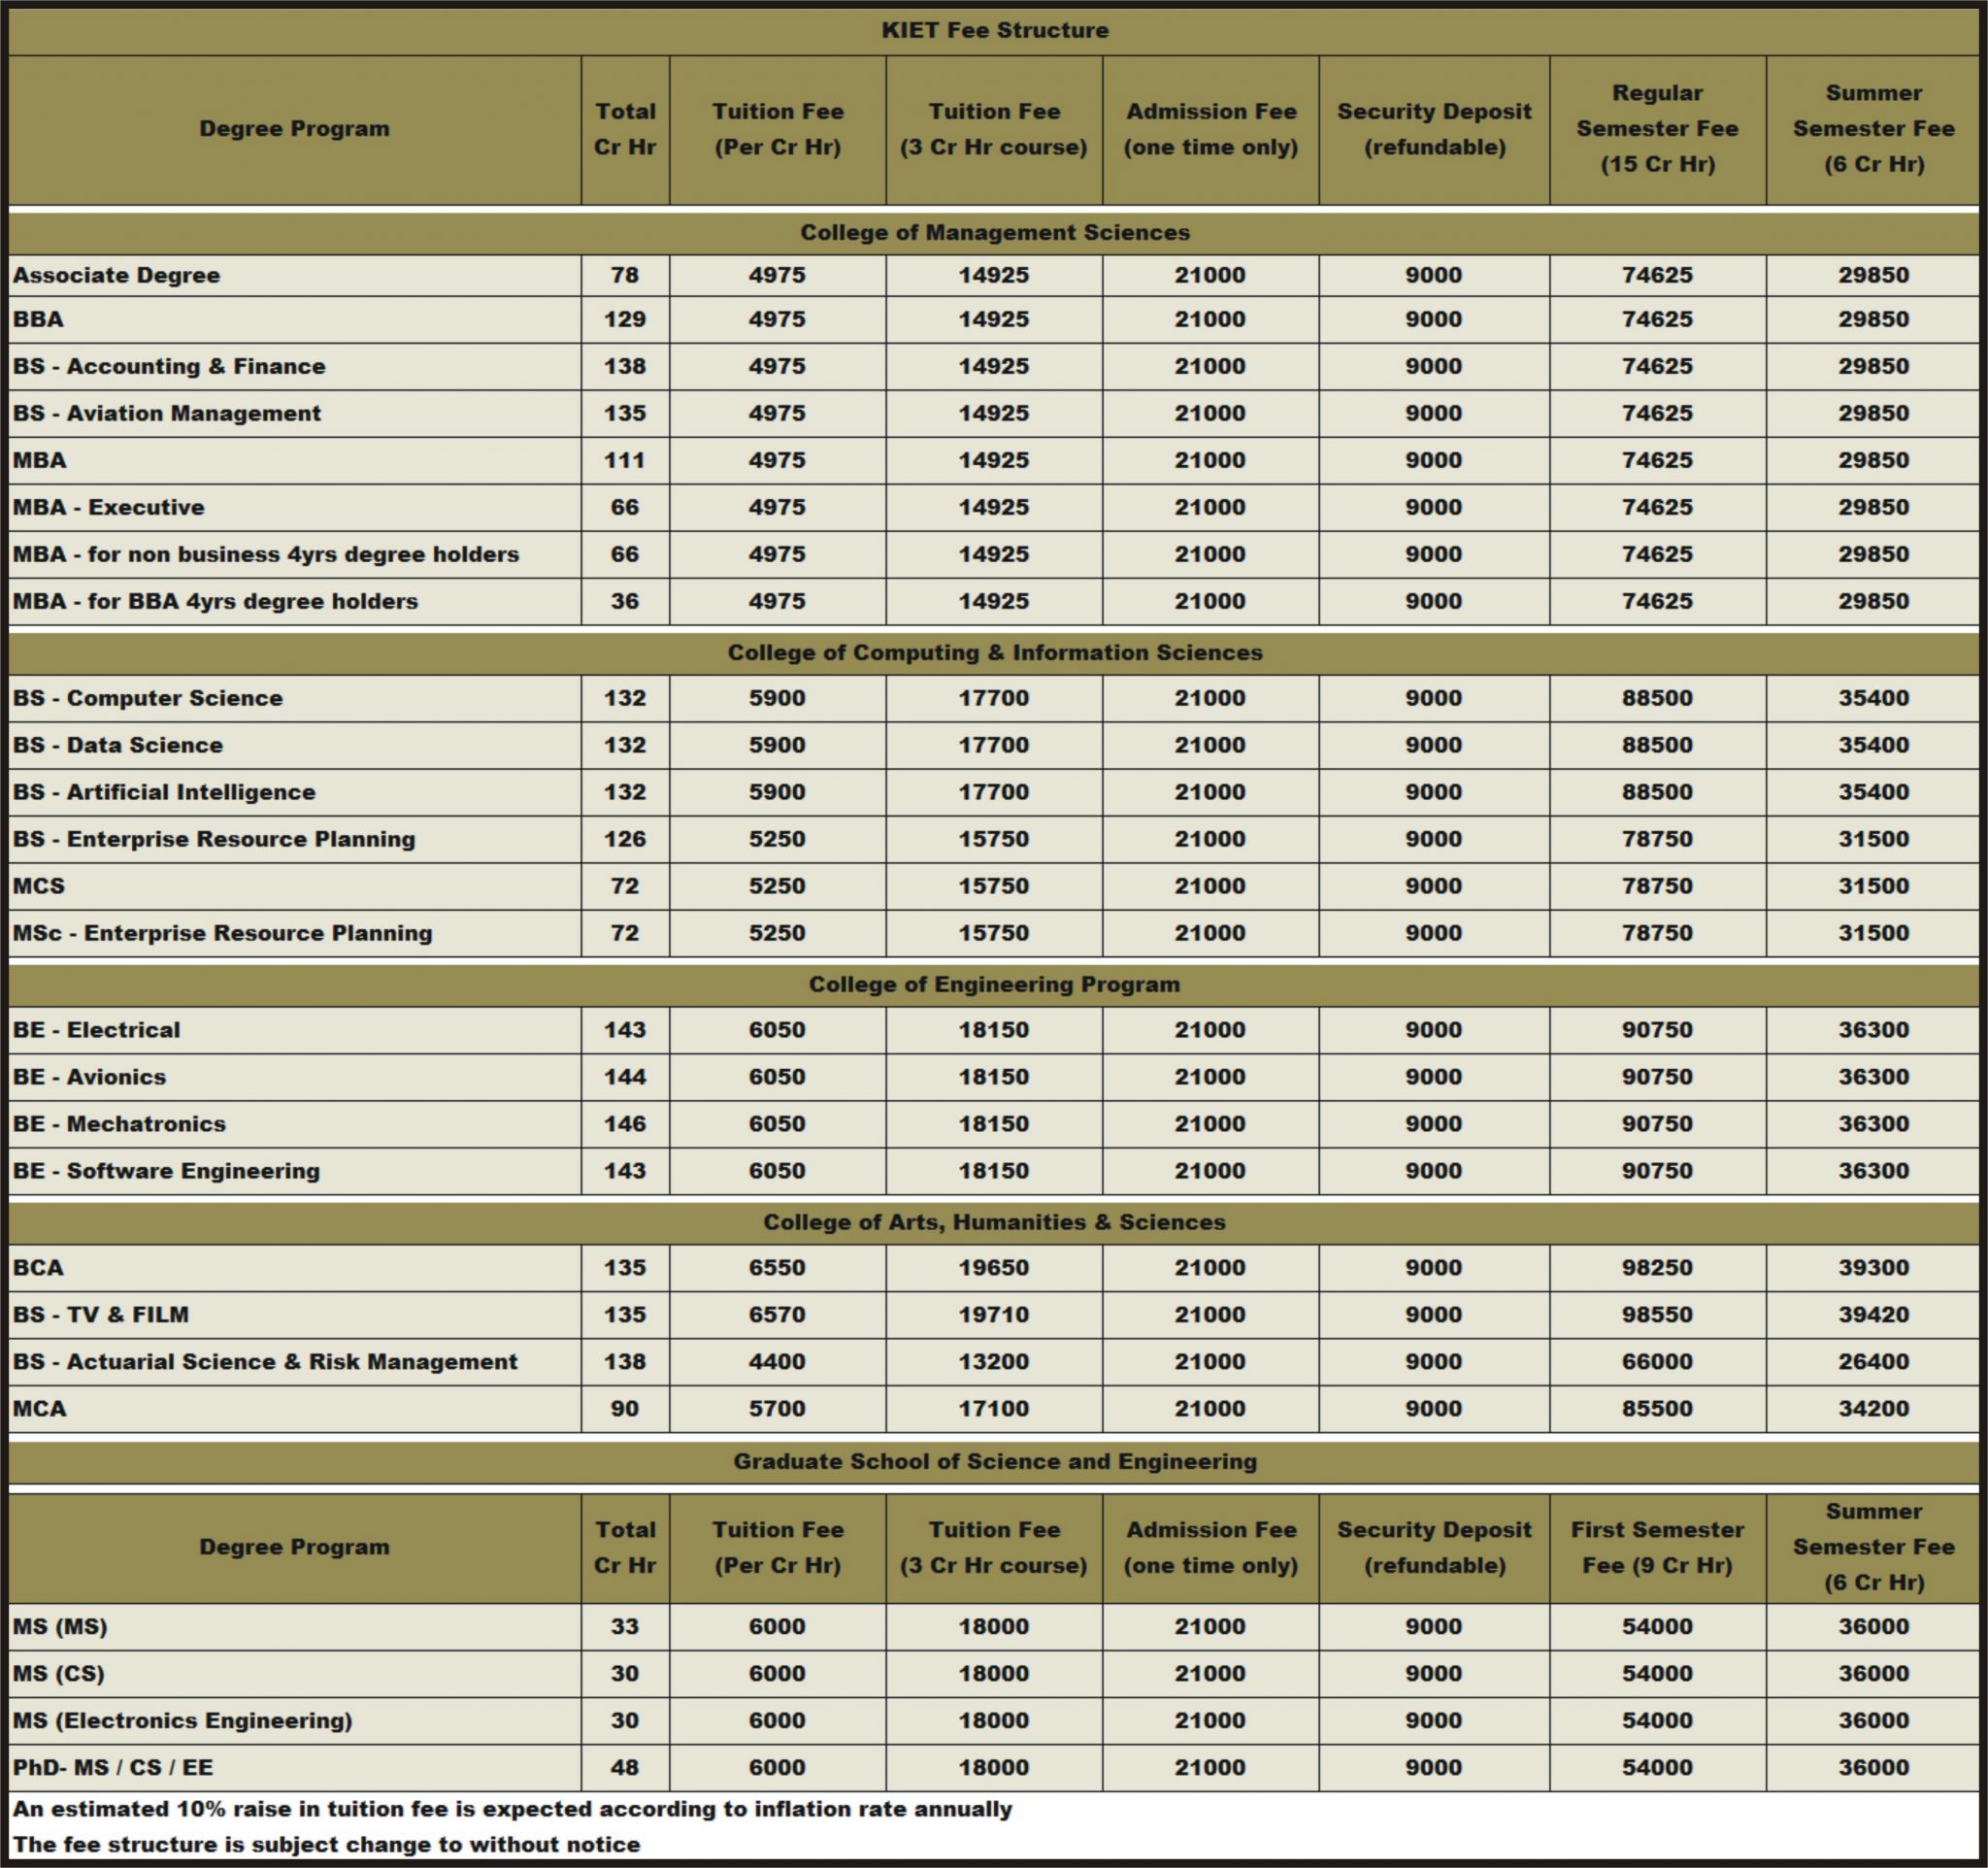 general-fee-structure-detailed-kiet-admissions